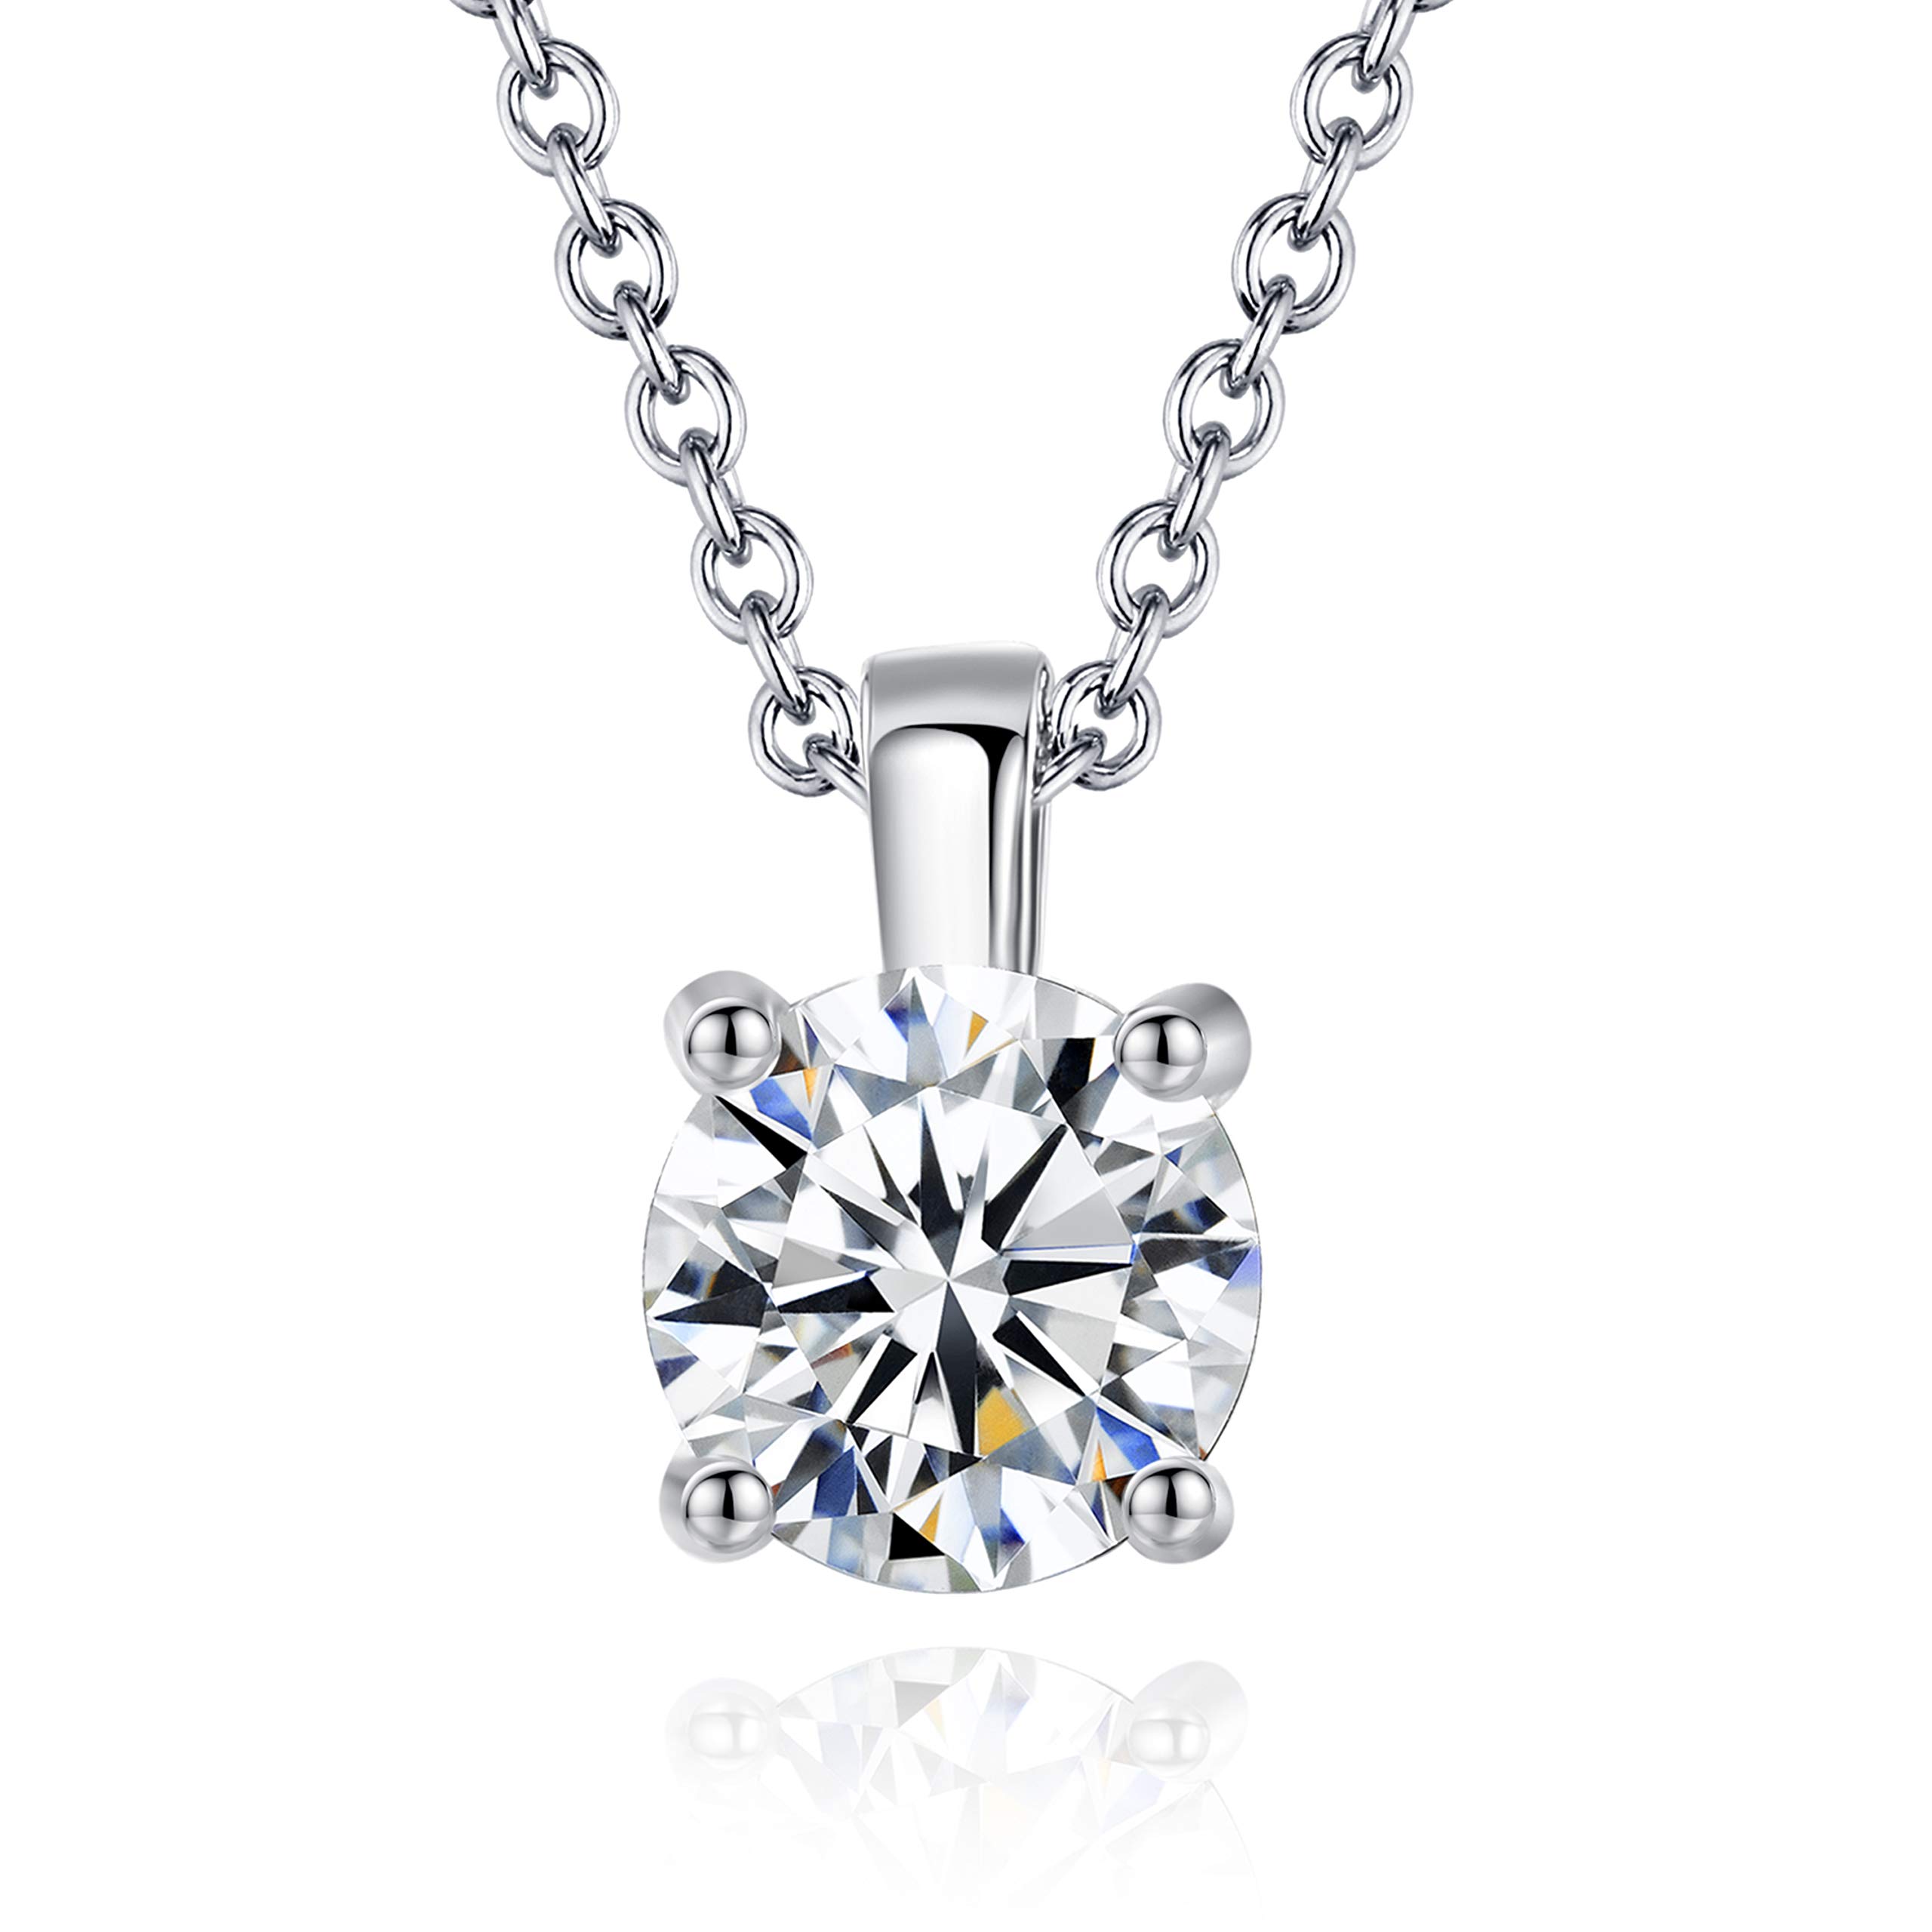 ROYALY 18K White Gold Plated Swarovski 7MM Crystal Pendant | Necklaces for Women | 18” Necklace Jewelry | Silver Chain Birthday Gifts for Women with Gift Box